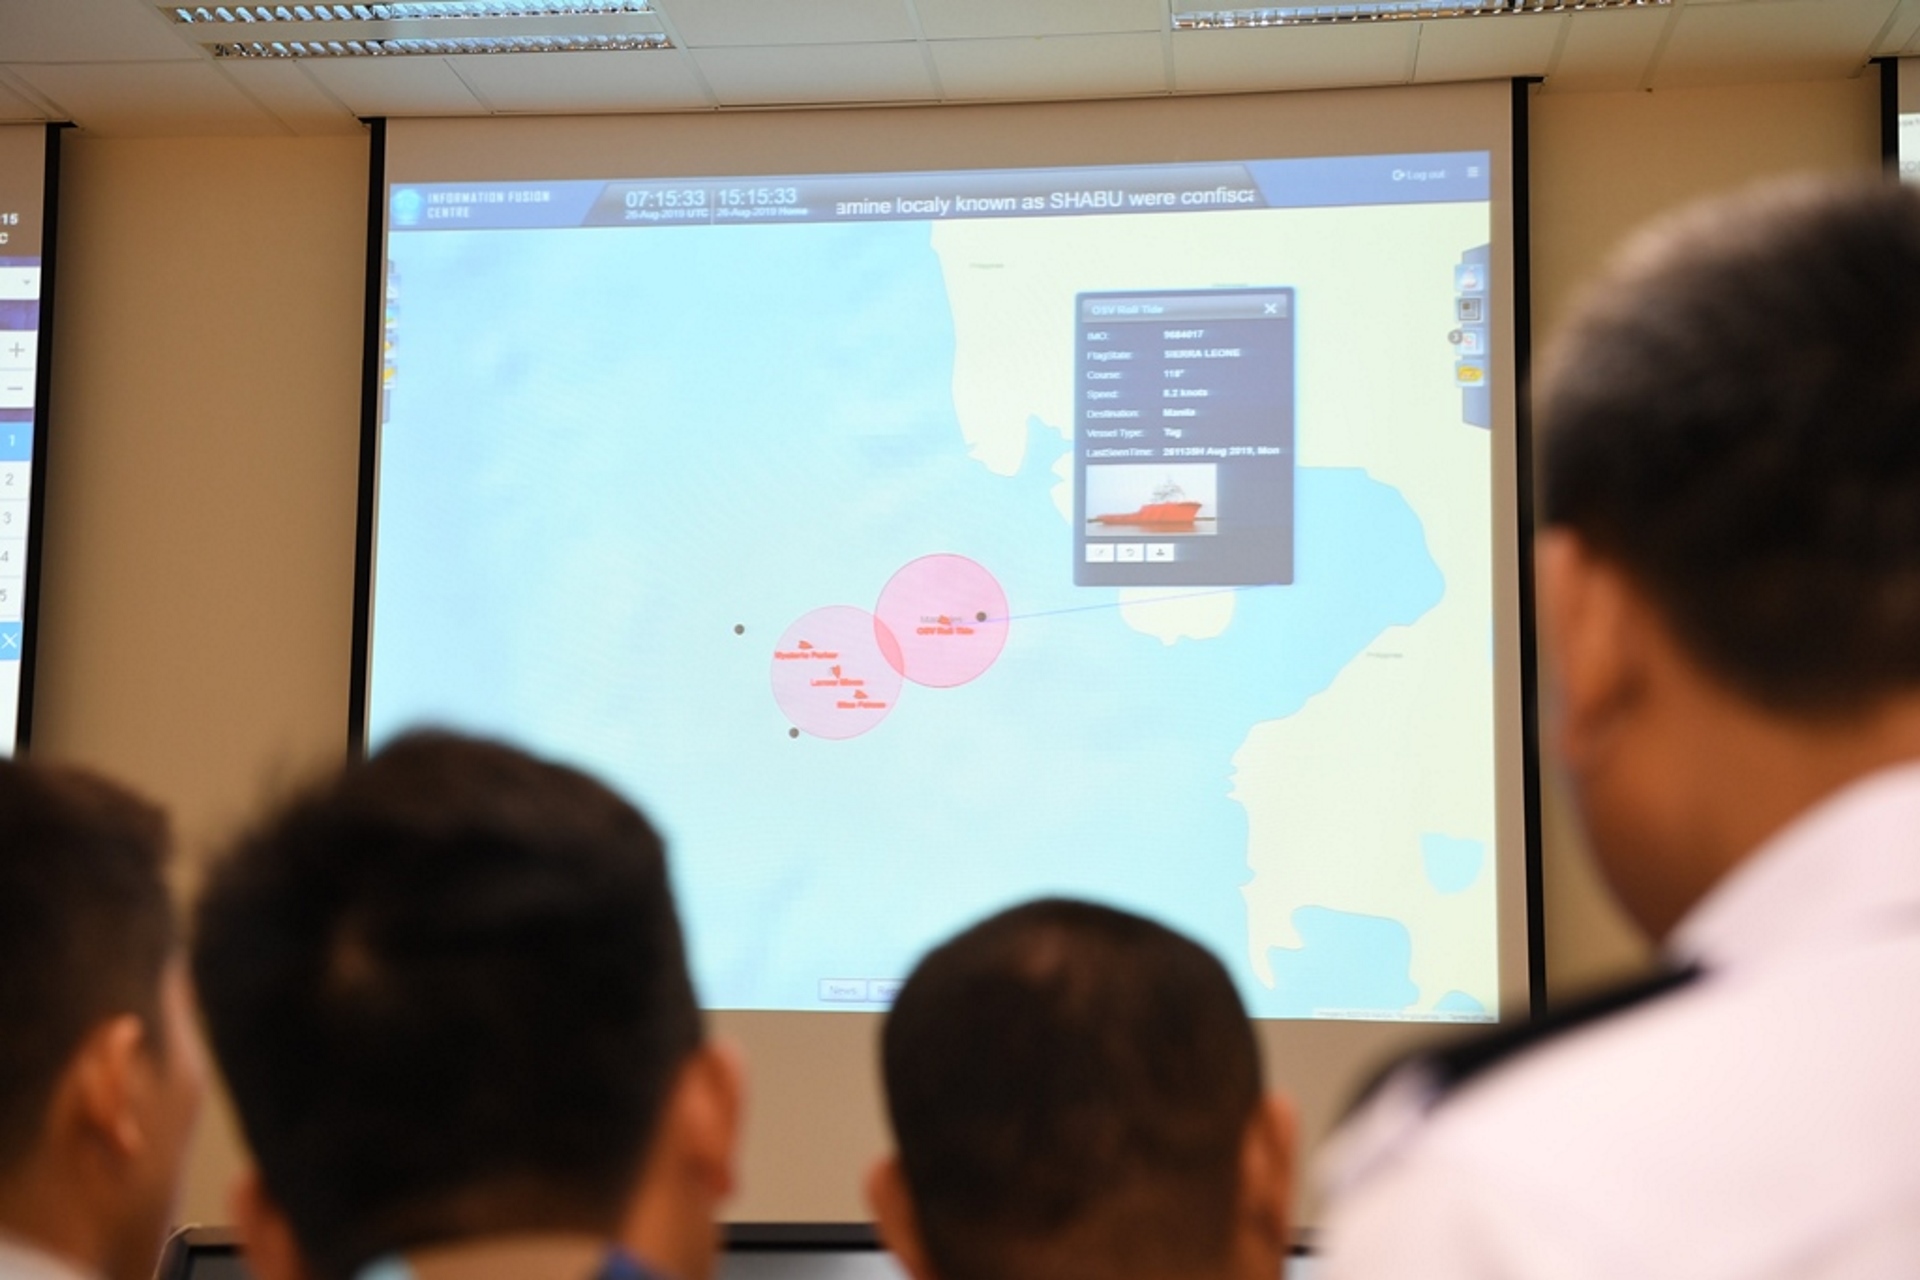 Exercise SEACAT participants using the Republic of Singapore Navy (RSN)'s Information Fusion Centre Real-time Information-sharing System